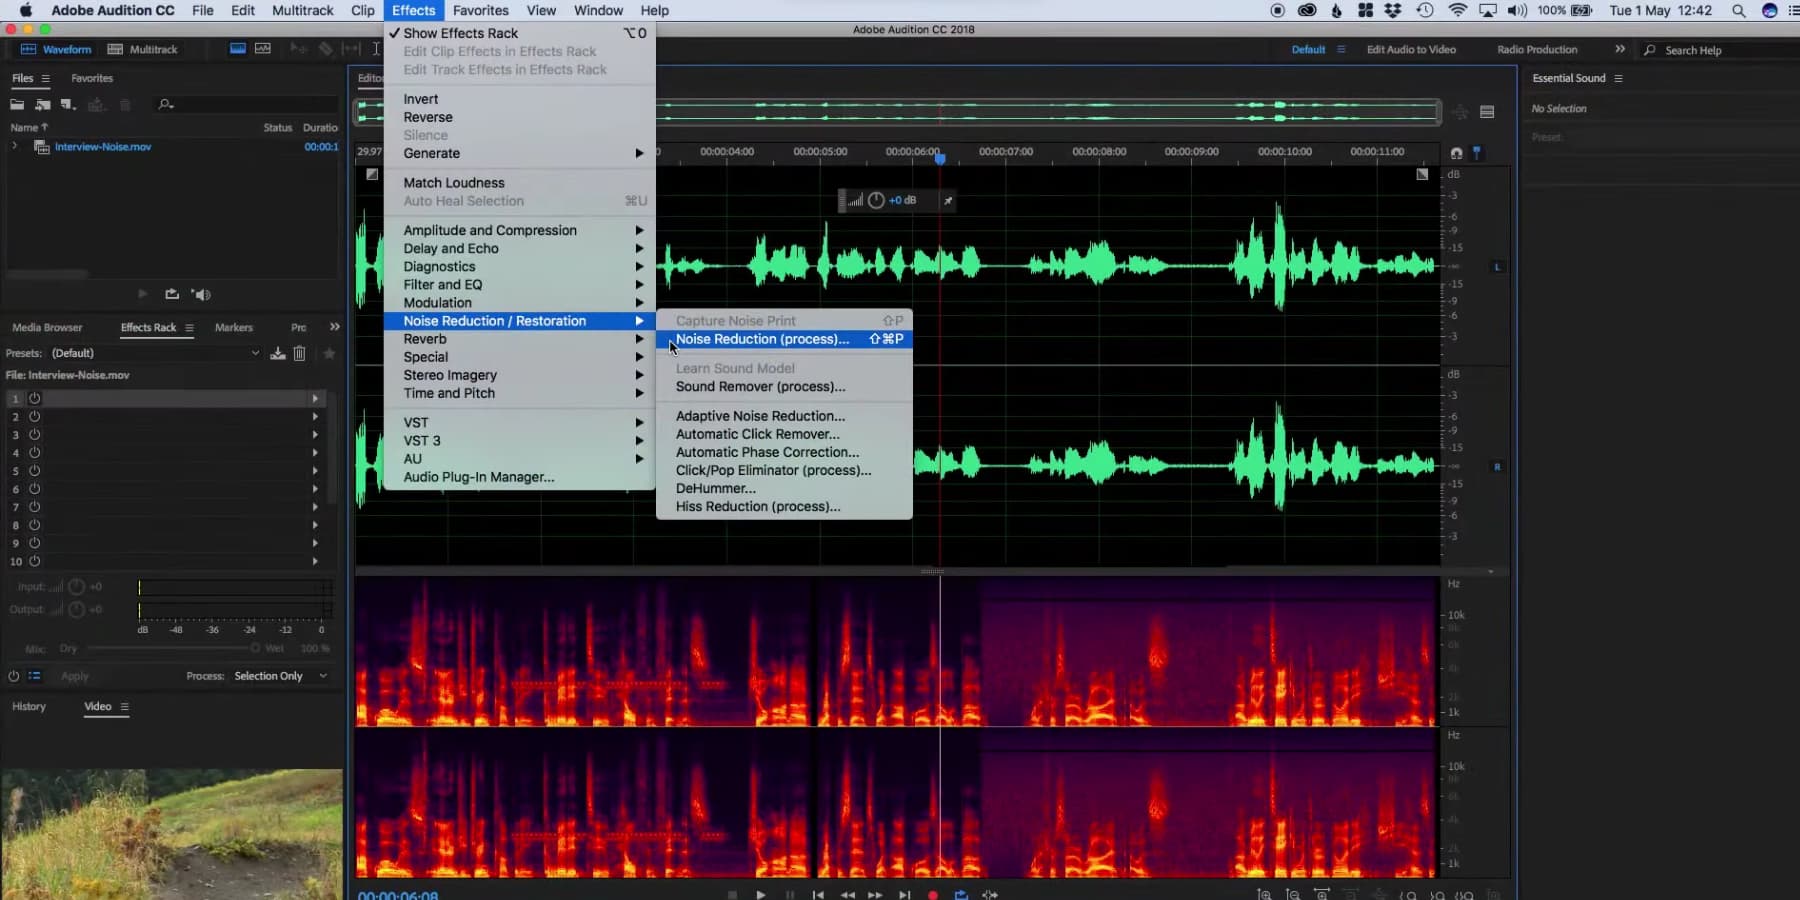 A screenshot of Adobe Audition's user interface